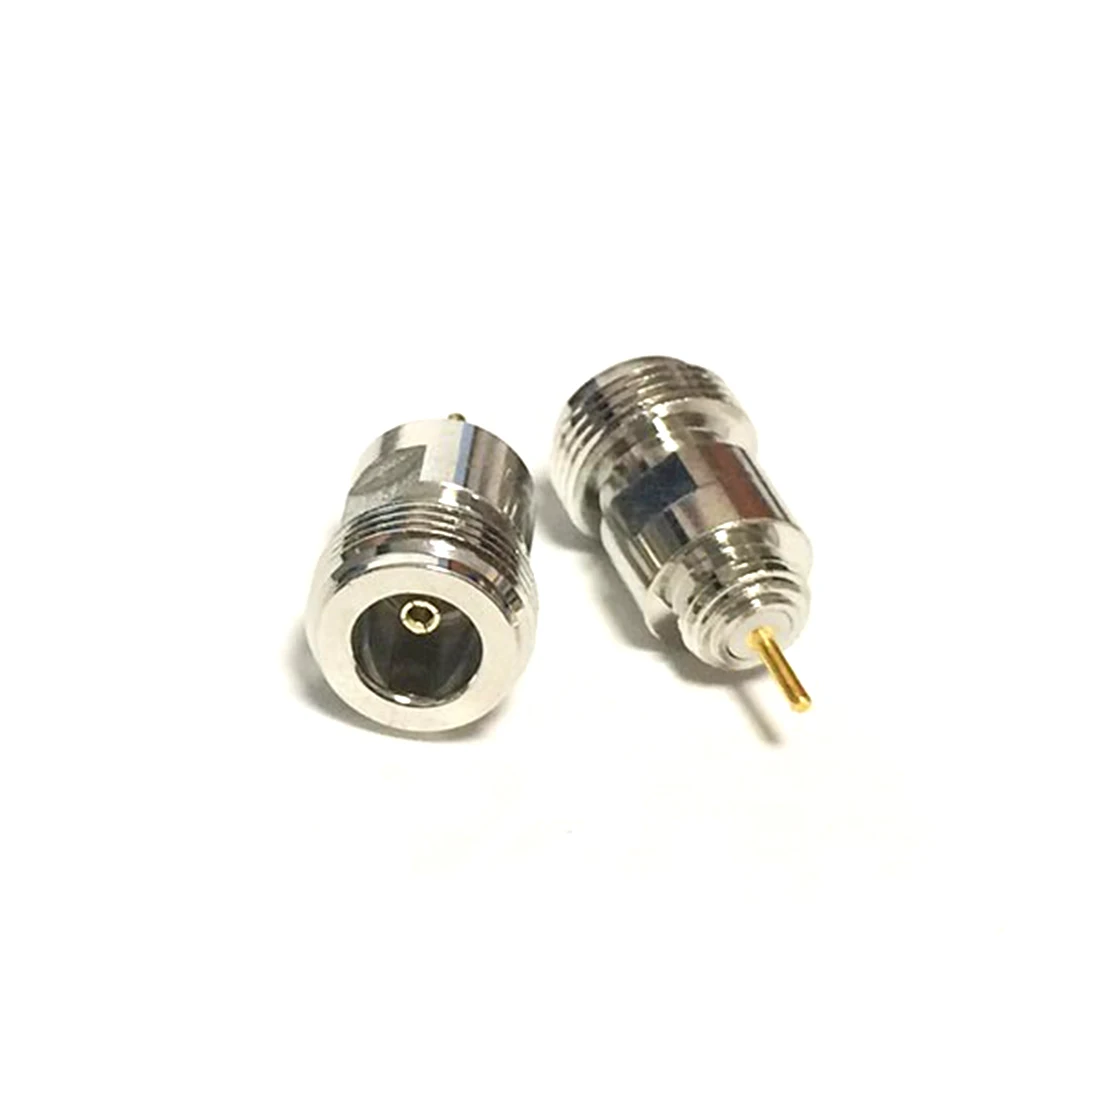 1pc  N Female Jack  RF Coax Adapter convertor  solder post Straight Nickelplated Dedicated amplifiers NEW wholesale microscope dedicated air soldering nozzle for quick 861dw 1300a 856ax hot iron pump bent straight gas gun station tip solder